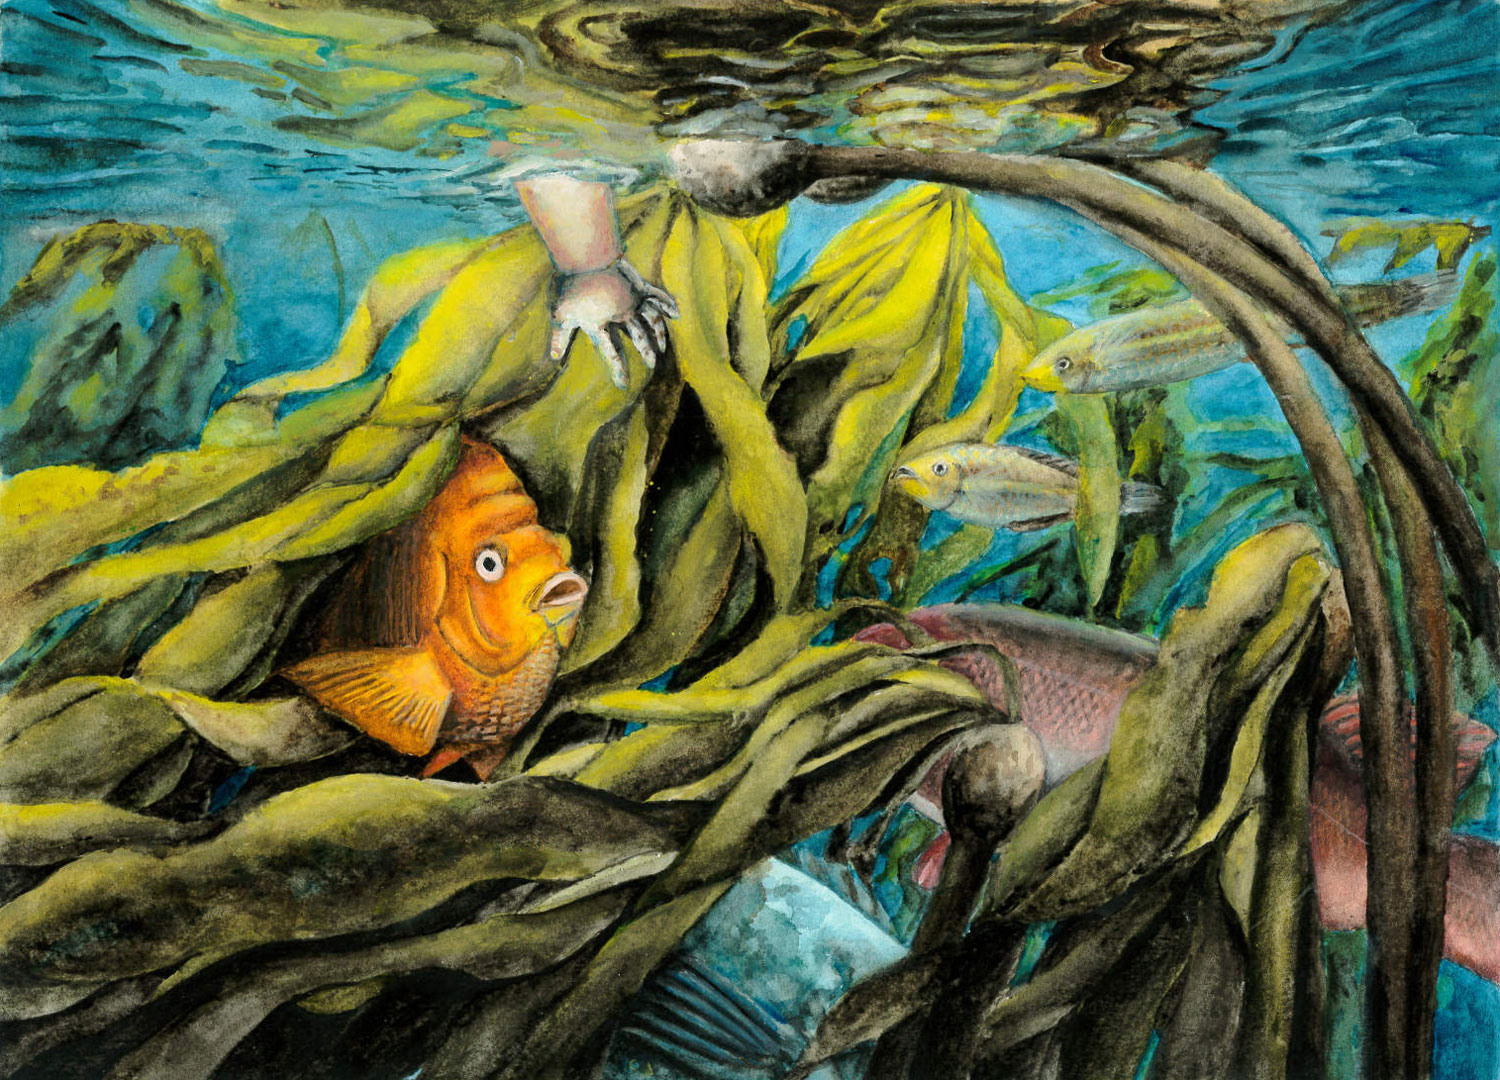 Fish swimming among kelp as a child's hand reaches down from the surface, in watercolor